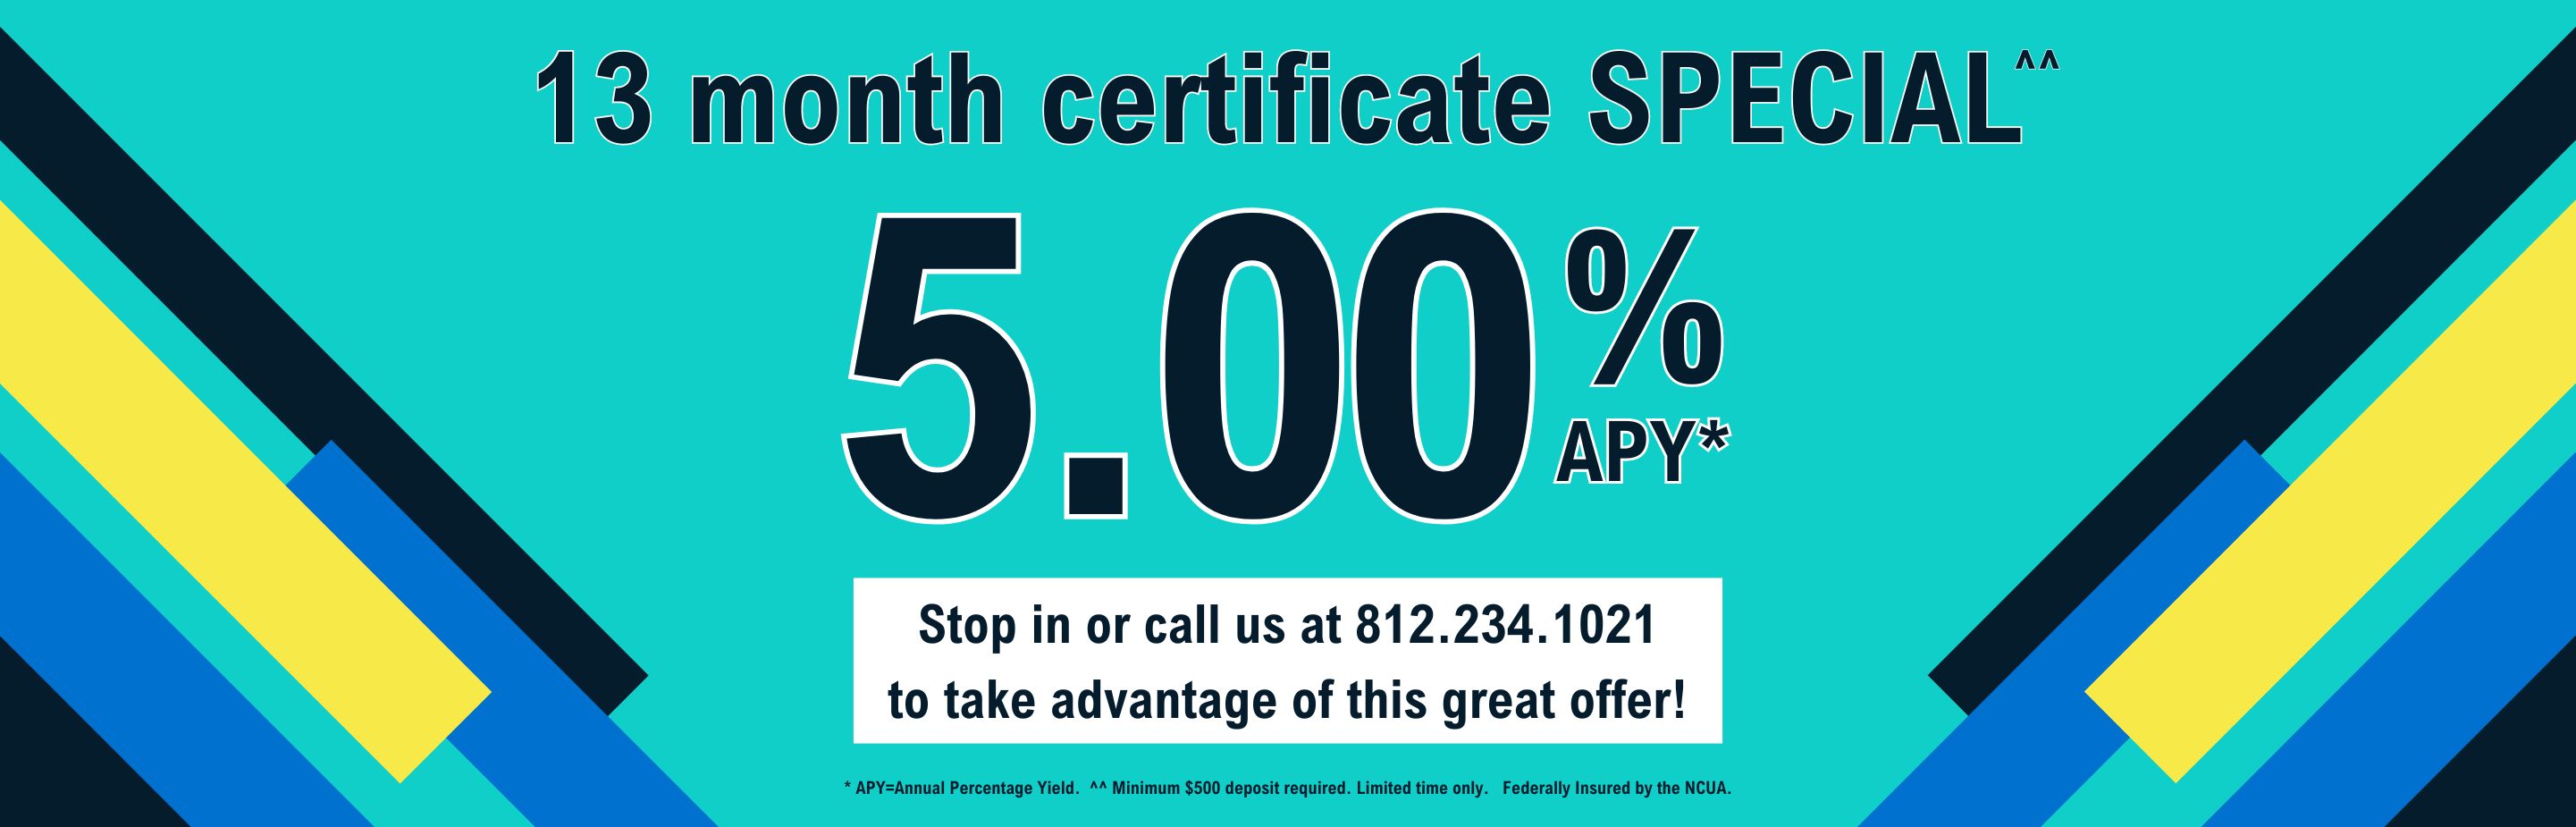 13 month certificate special 5.00%